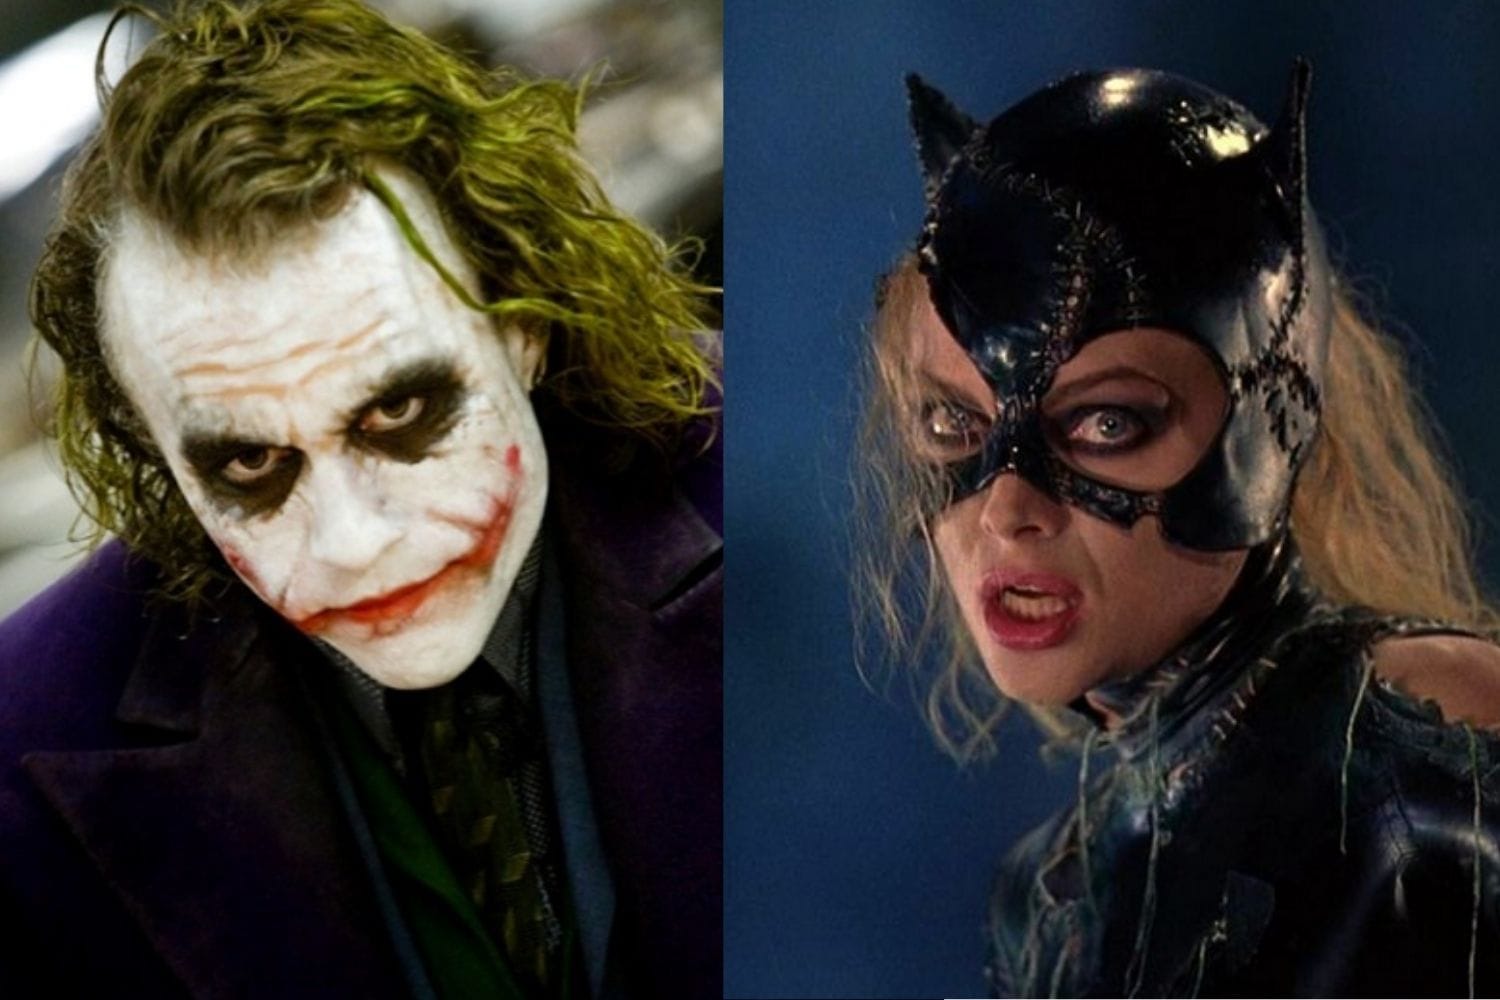 All The Batman Movie Villains Ranked From Best to Worst - Let's Eat Cake